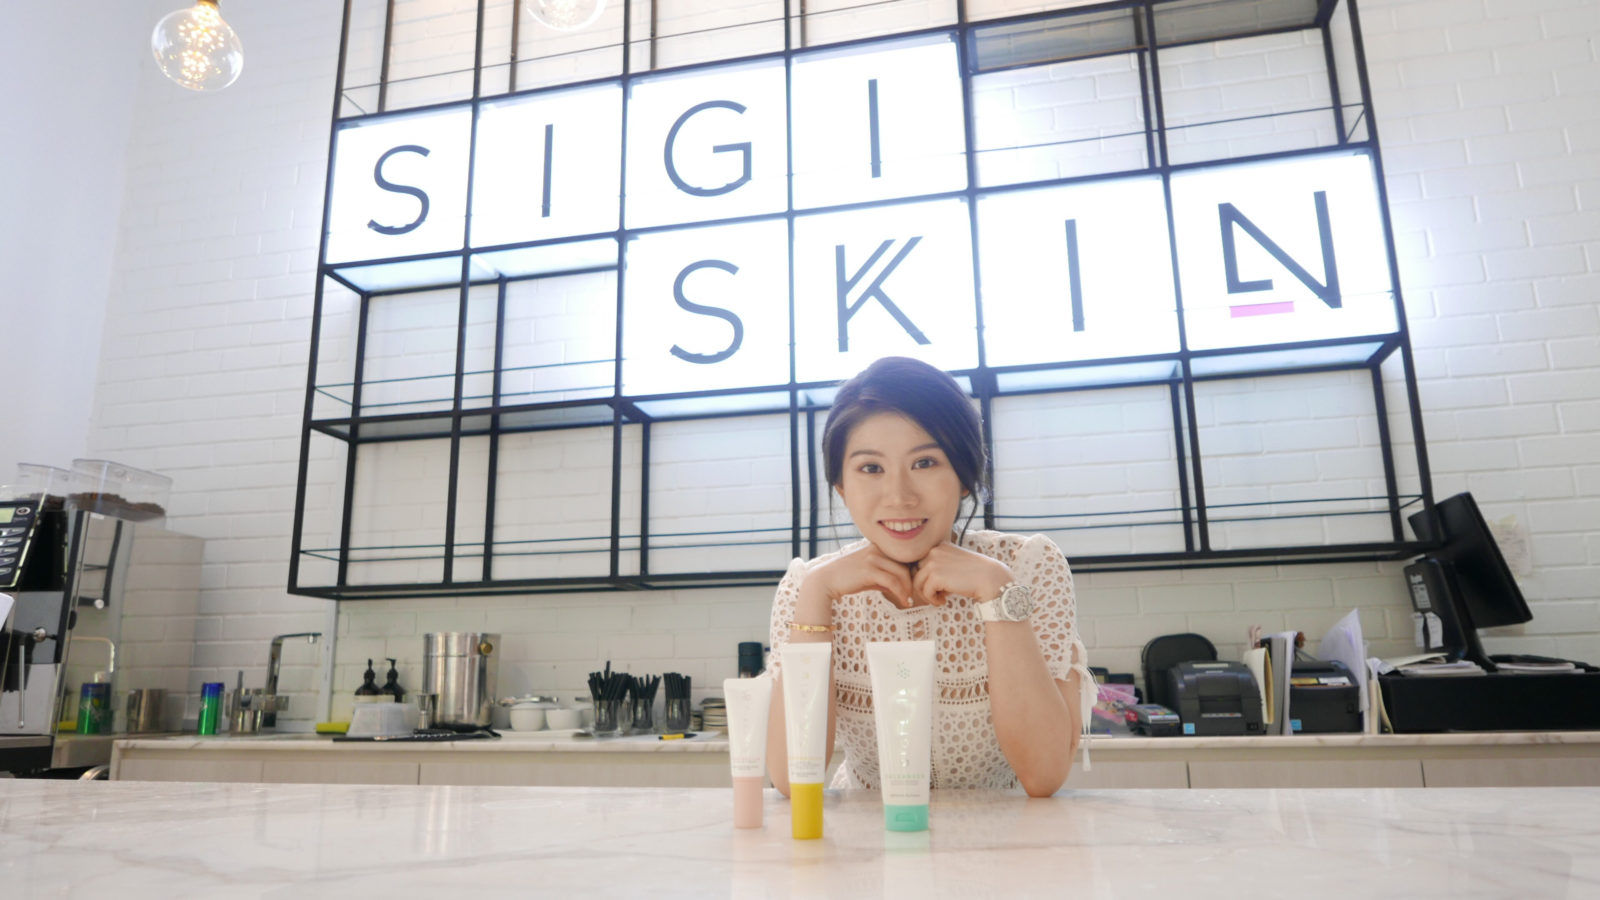 Behind the brand: Sigi Skin founder Xenia Wong on how the brand gives back